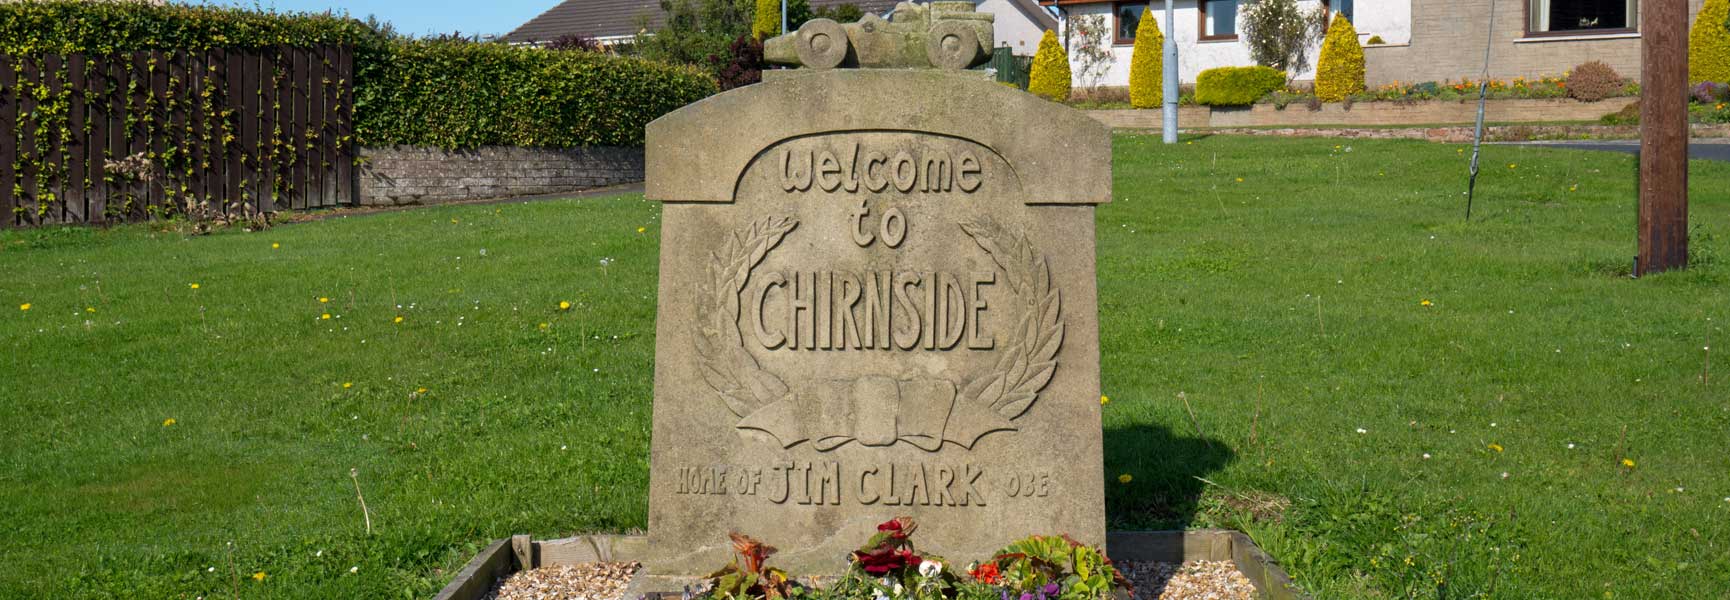 Welcome to Chirnside